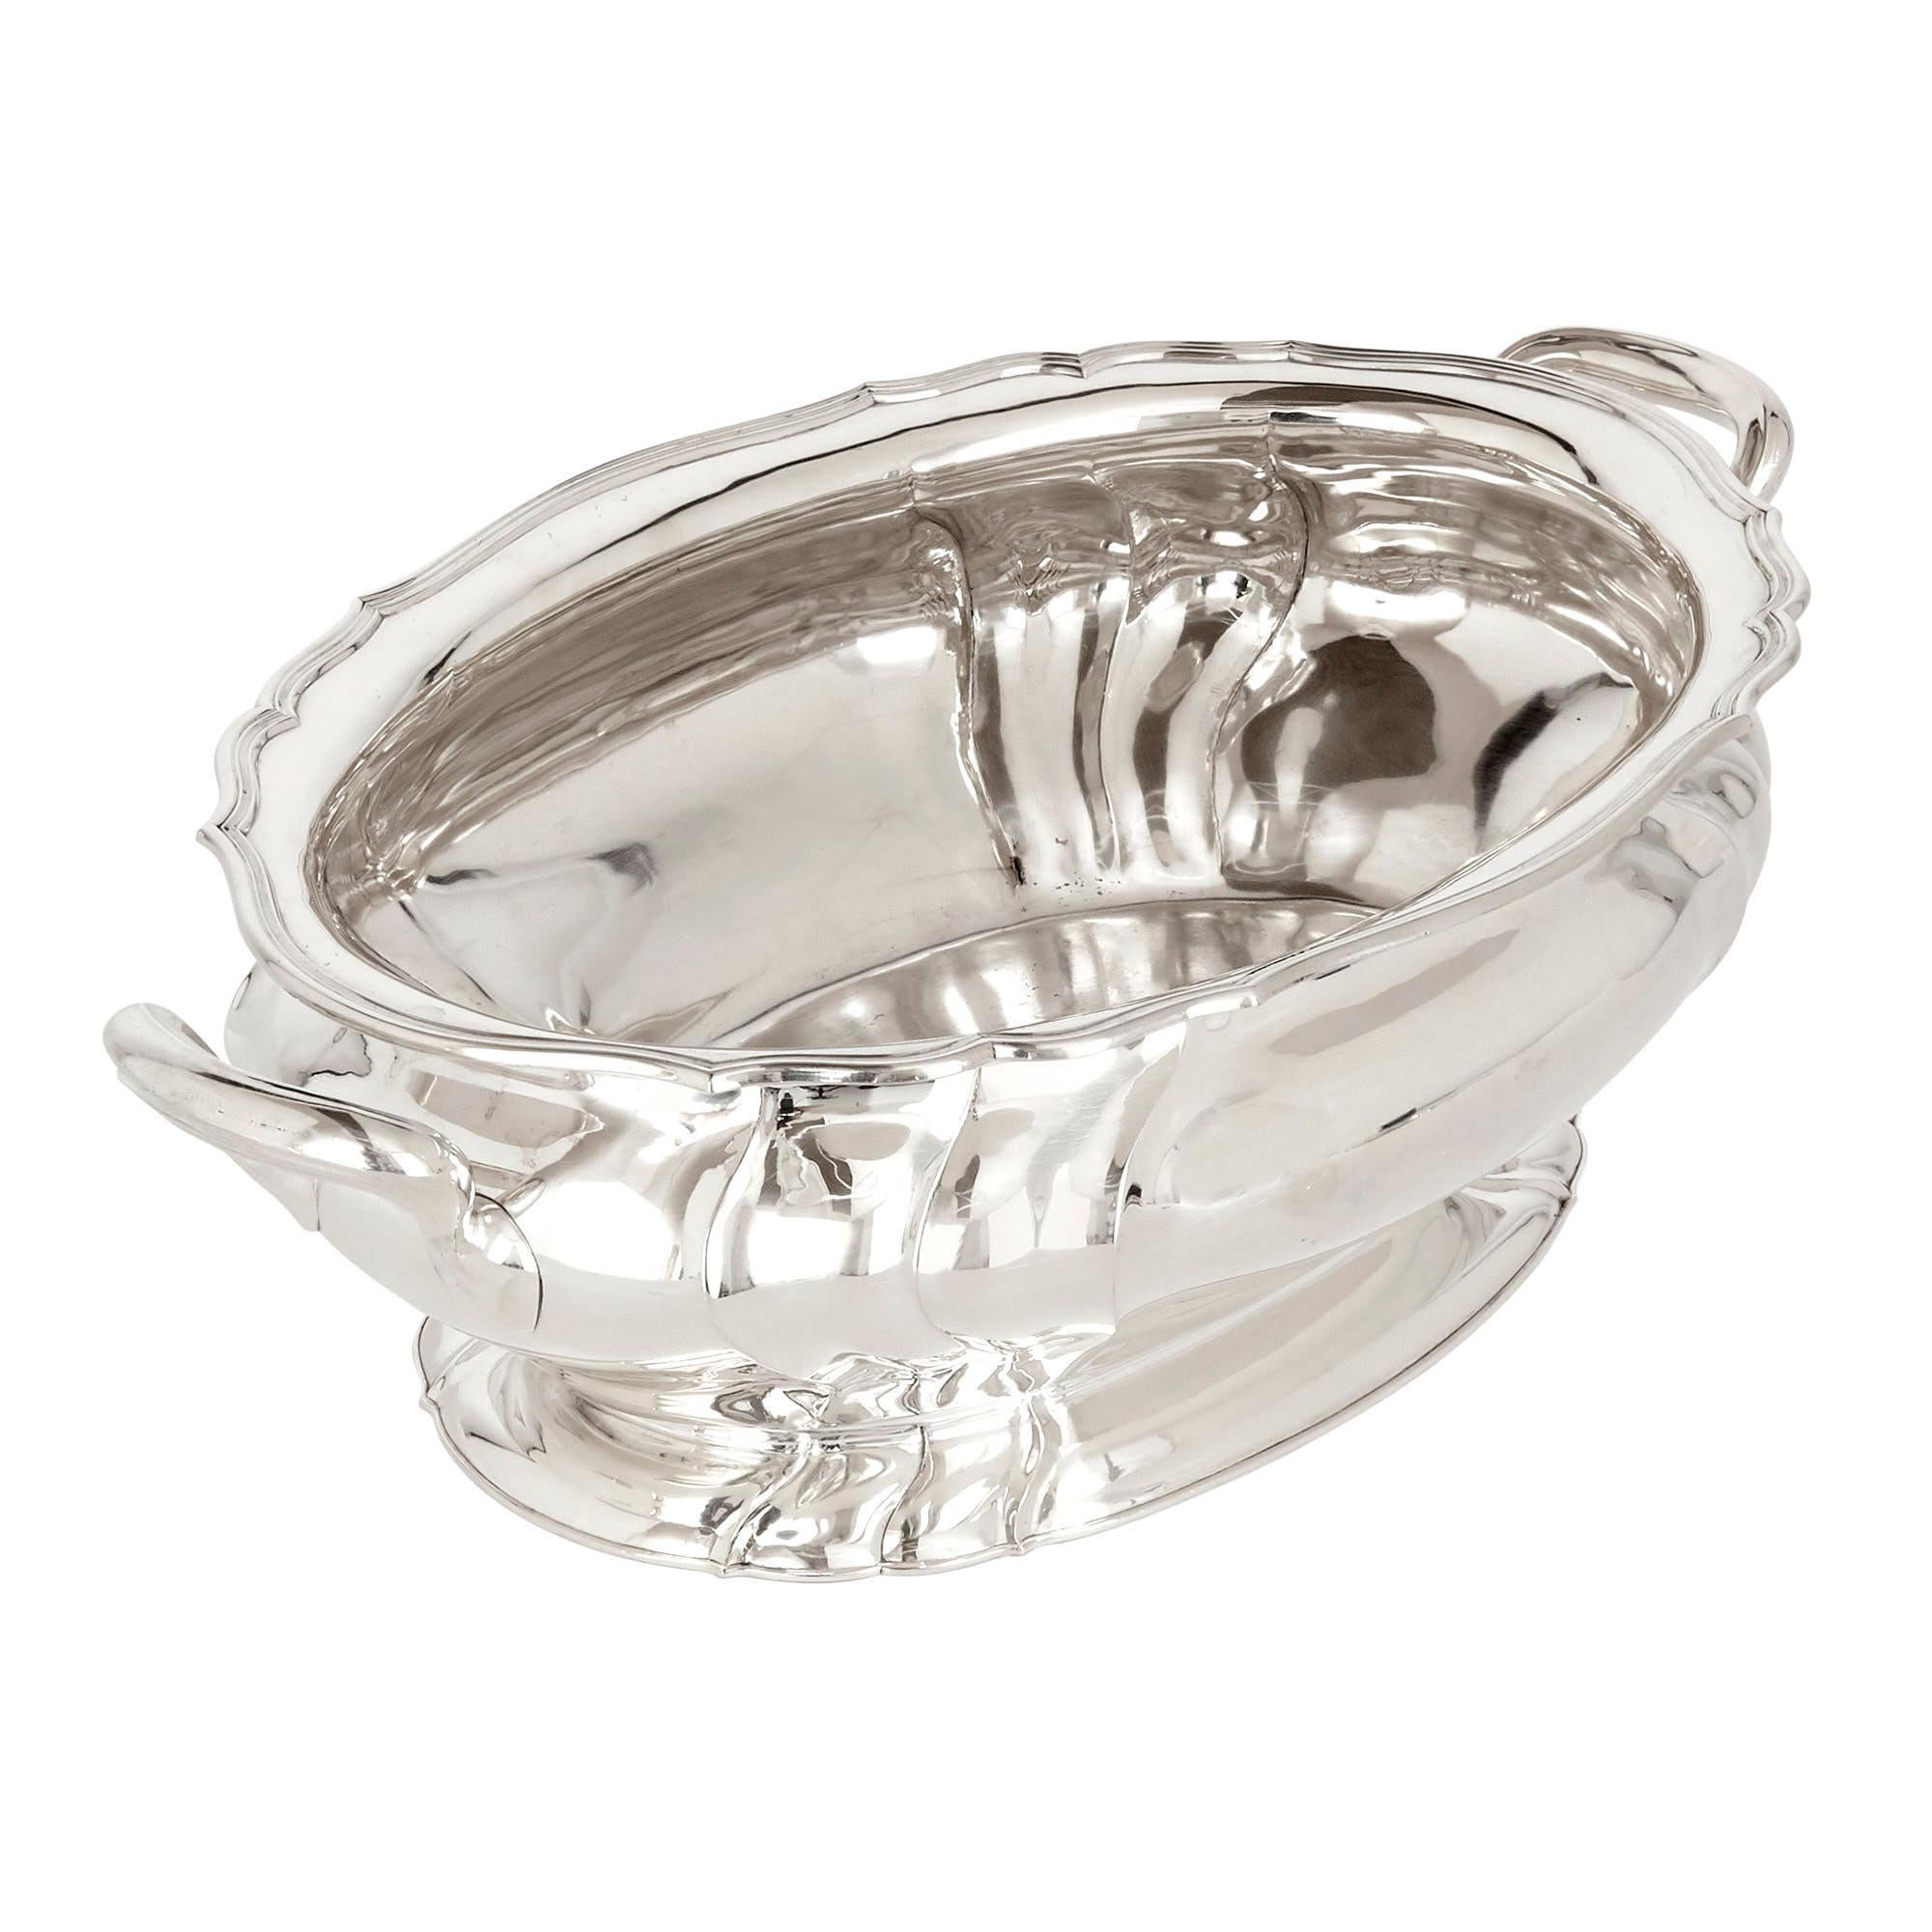 Large German silver bowl, fully hallmarked
German, early 20th century
Measures: Height 16.5cm, width 54cm, depth 31.5cm

Crafted from fine silver and produced in Germany in the early decades of the 20th century, this fine bowl would make a